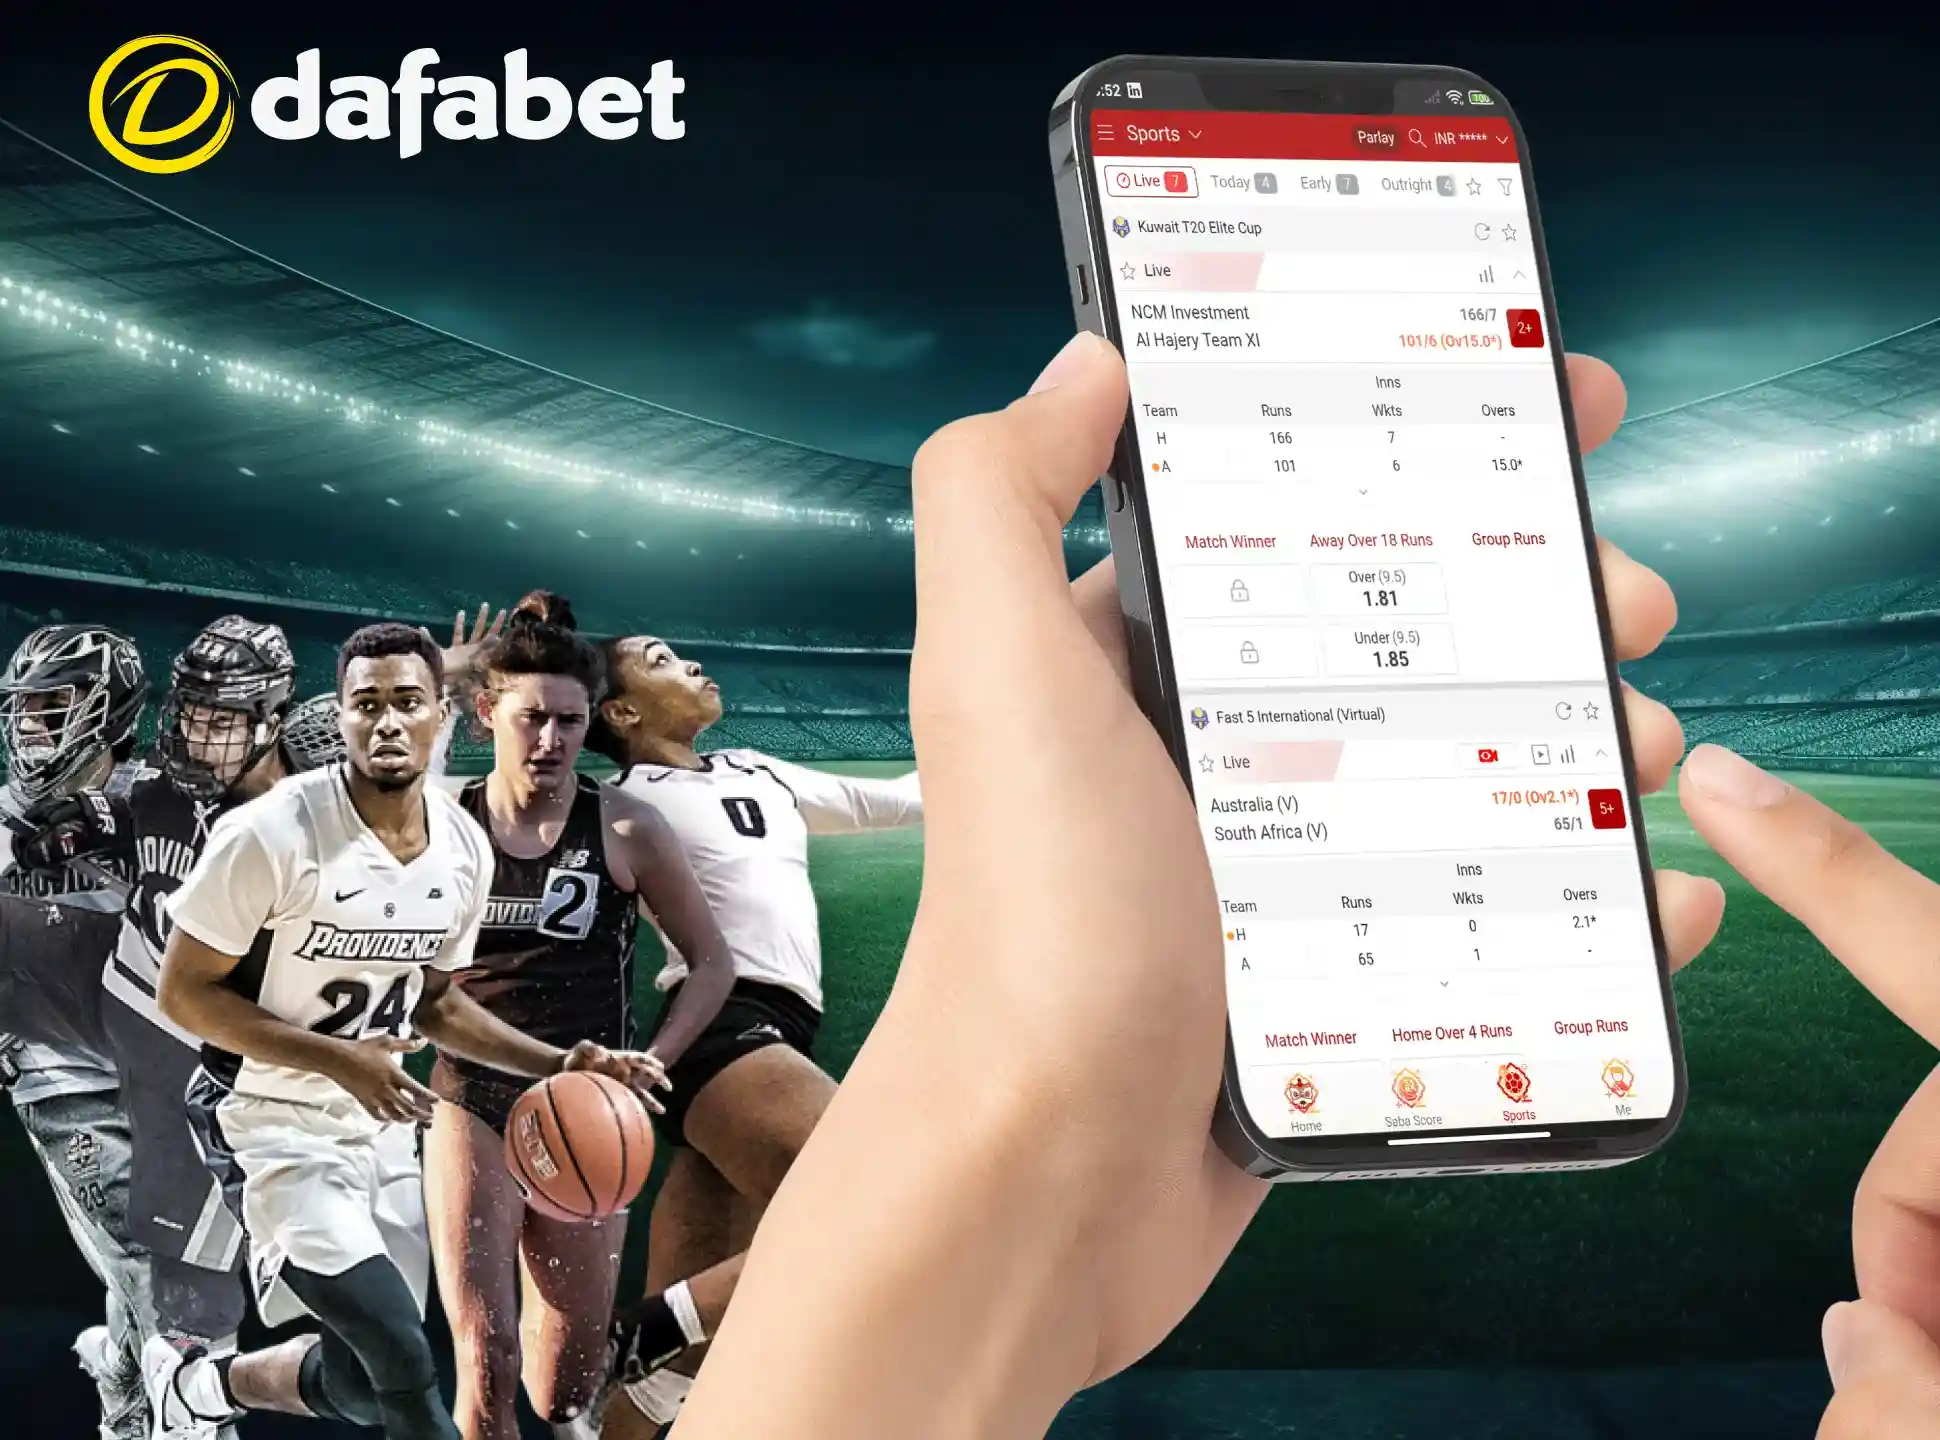 Dafabet offers a wide range of betting markets for players.